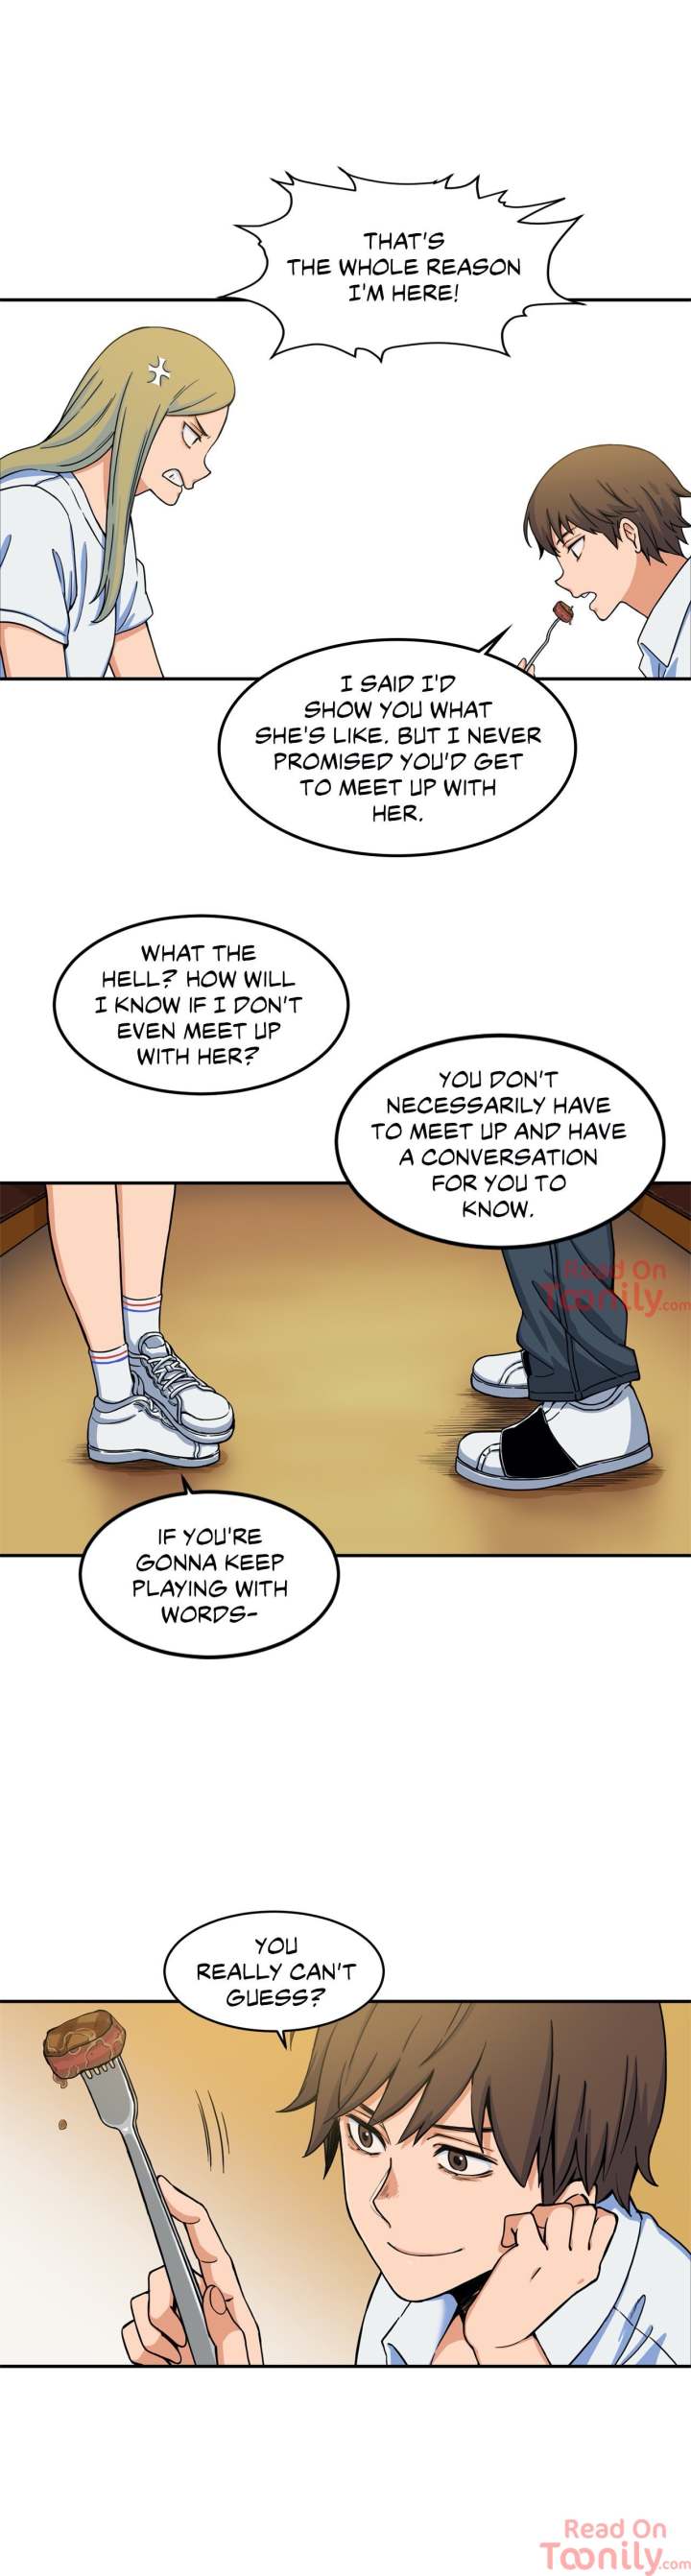 Head Over Heels - Chapter 8 Page 20